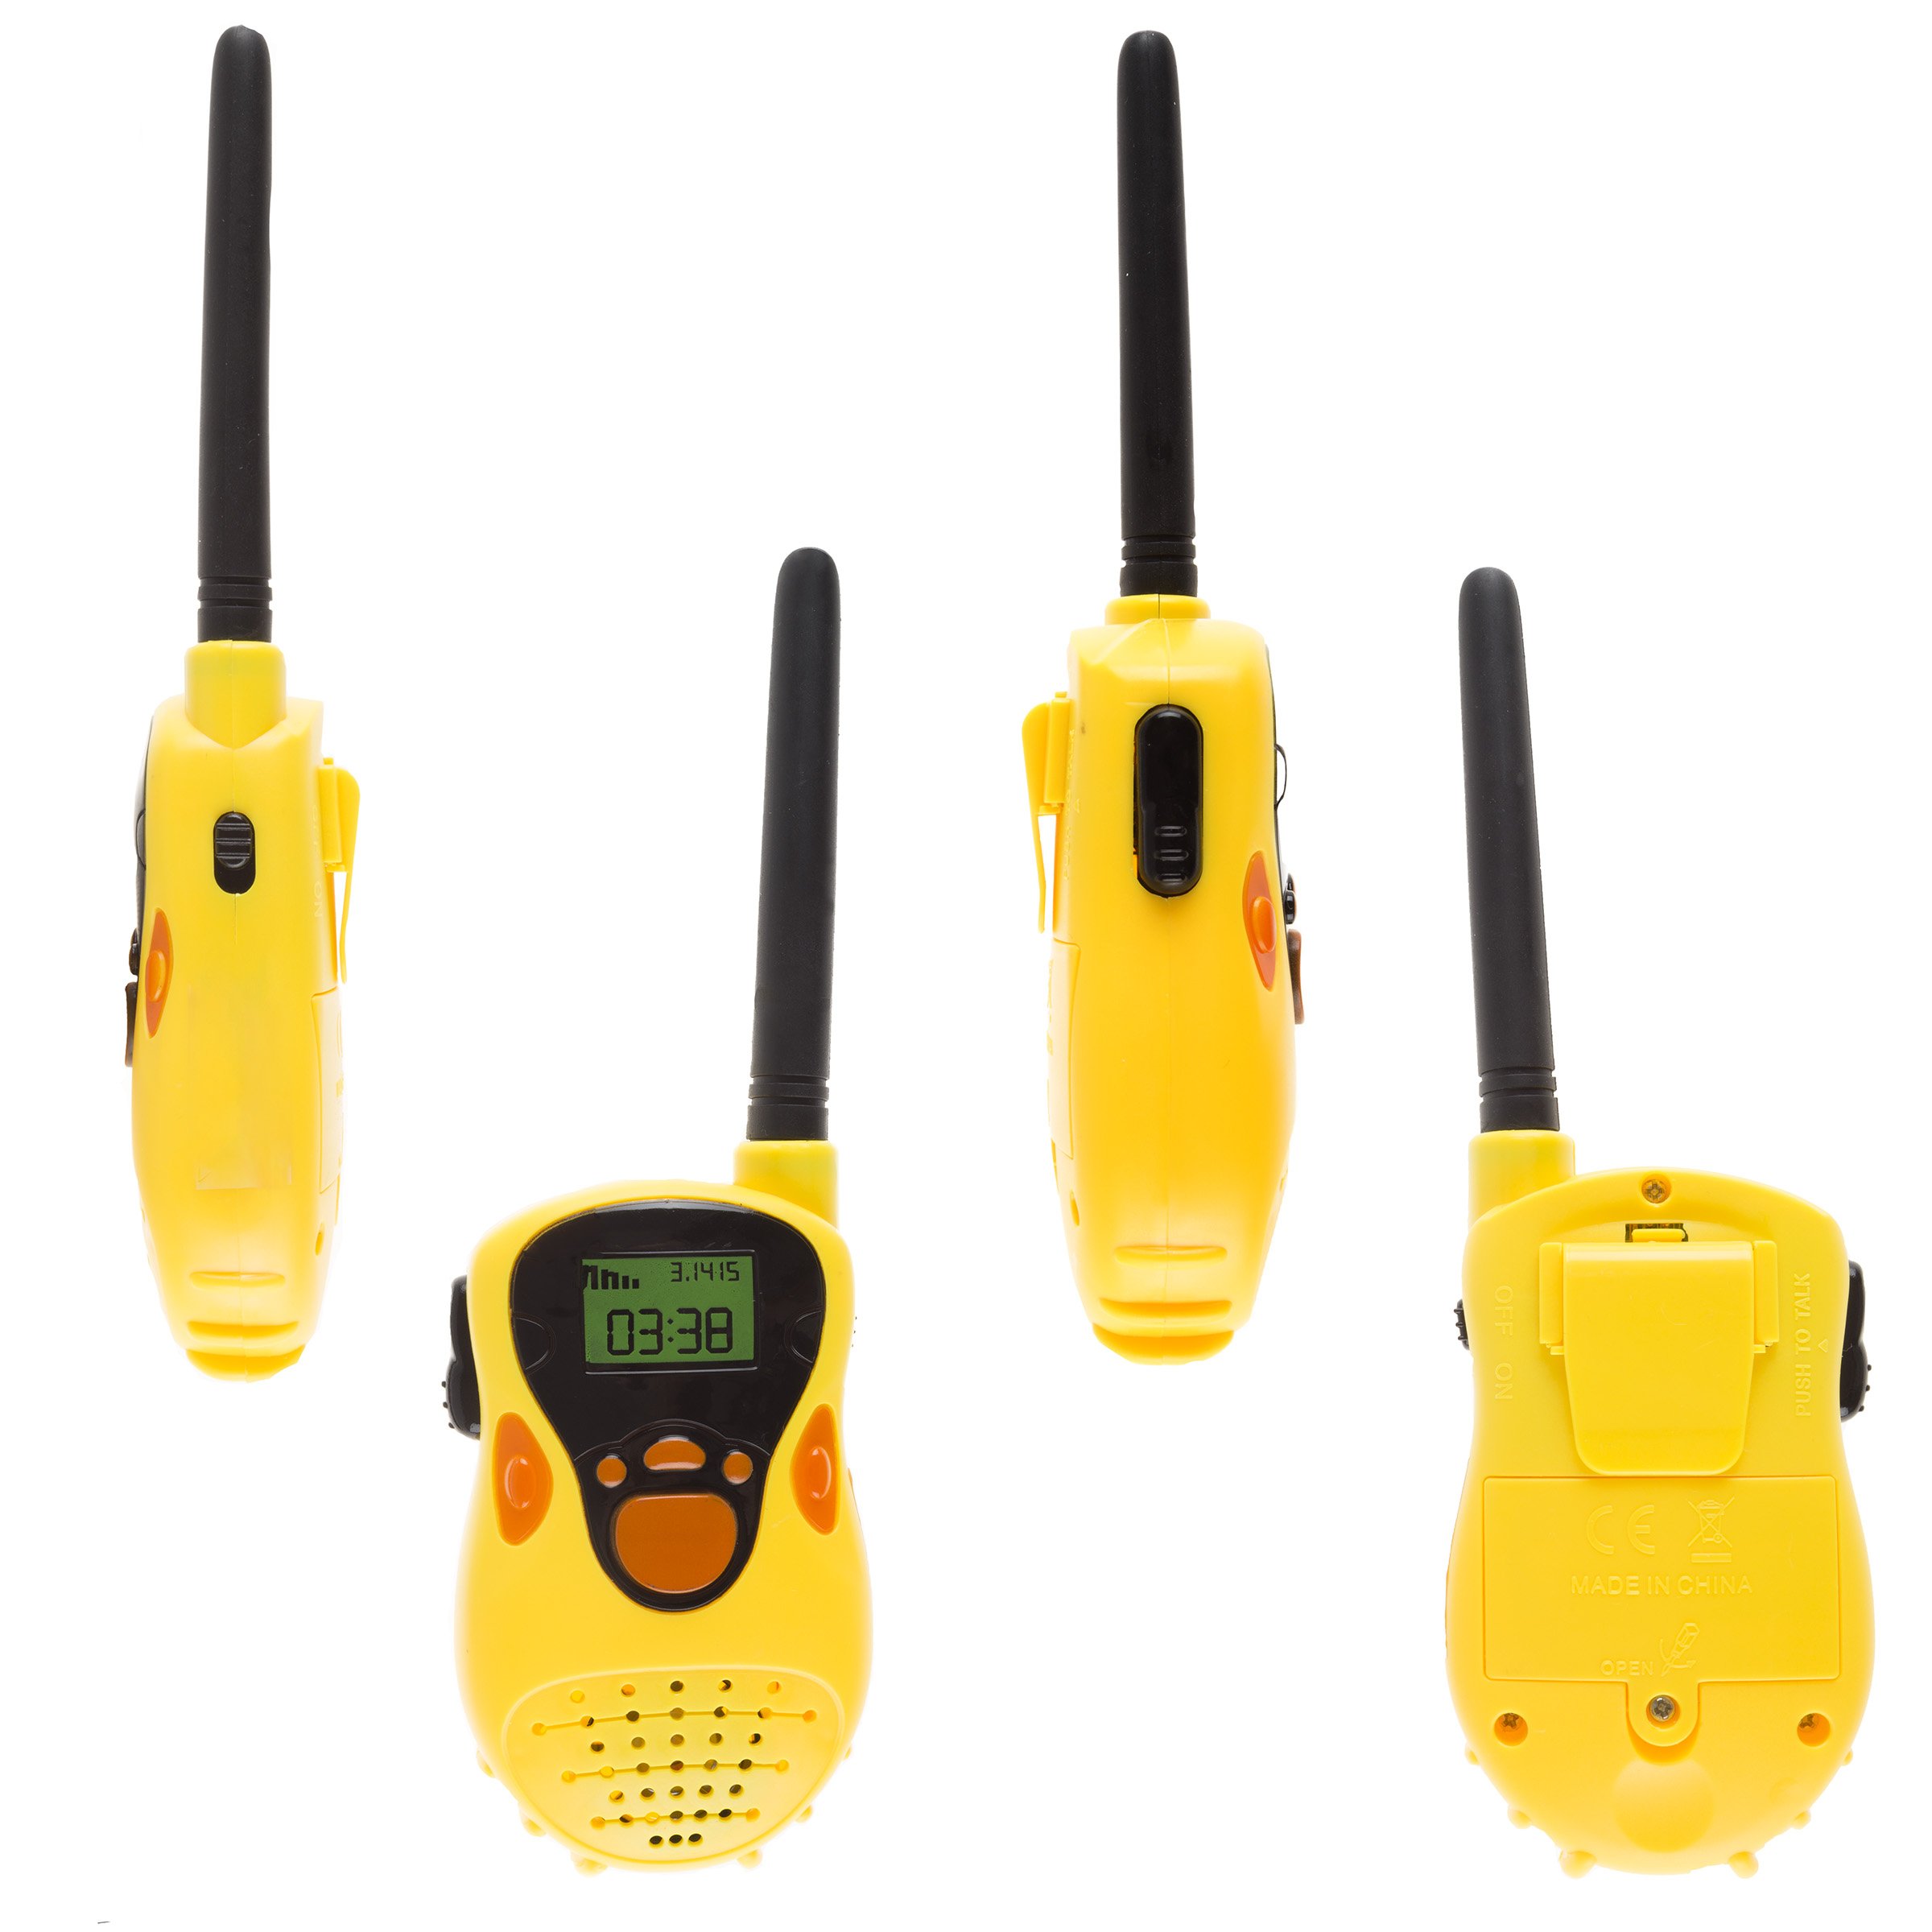 Hey! Play! Kids Walkie Talkie Set - 2-Pack Indoor Outdoor Toy - Battery Operated, Works Up to 130 Ft - Great for Fun Pretend Play